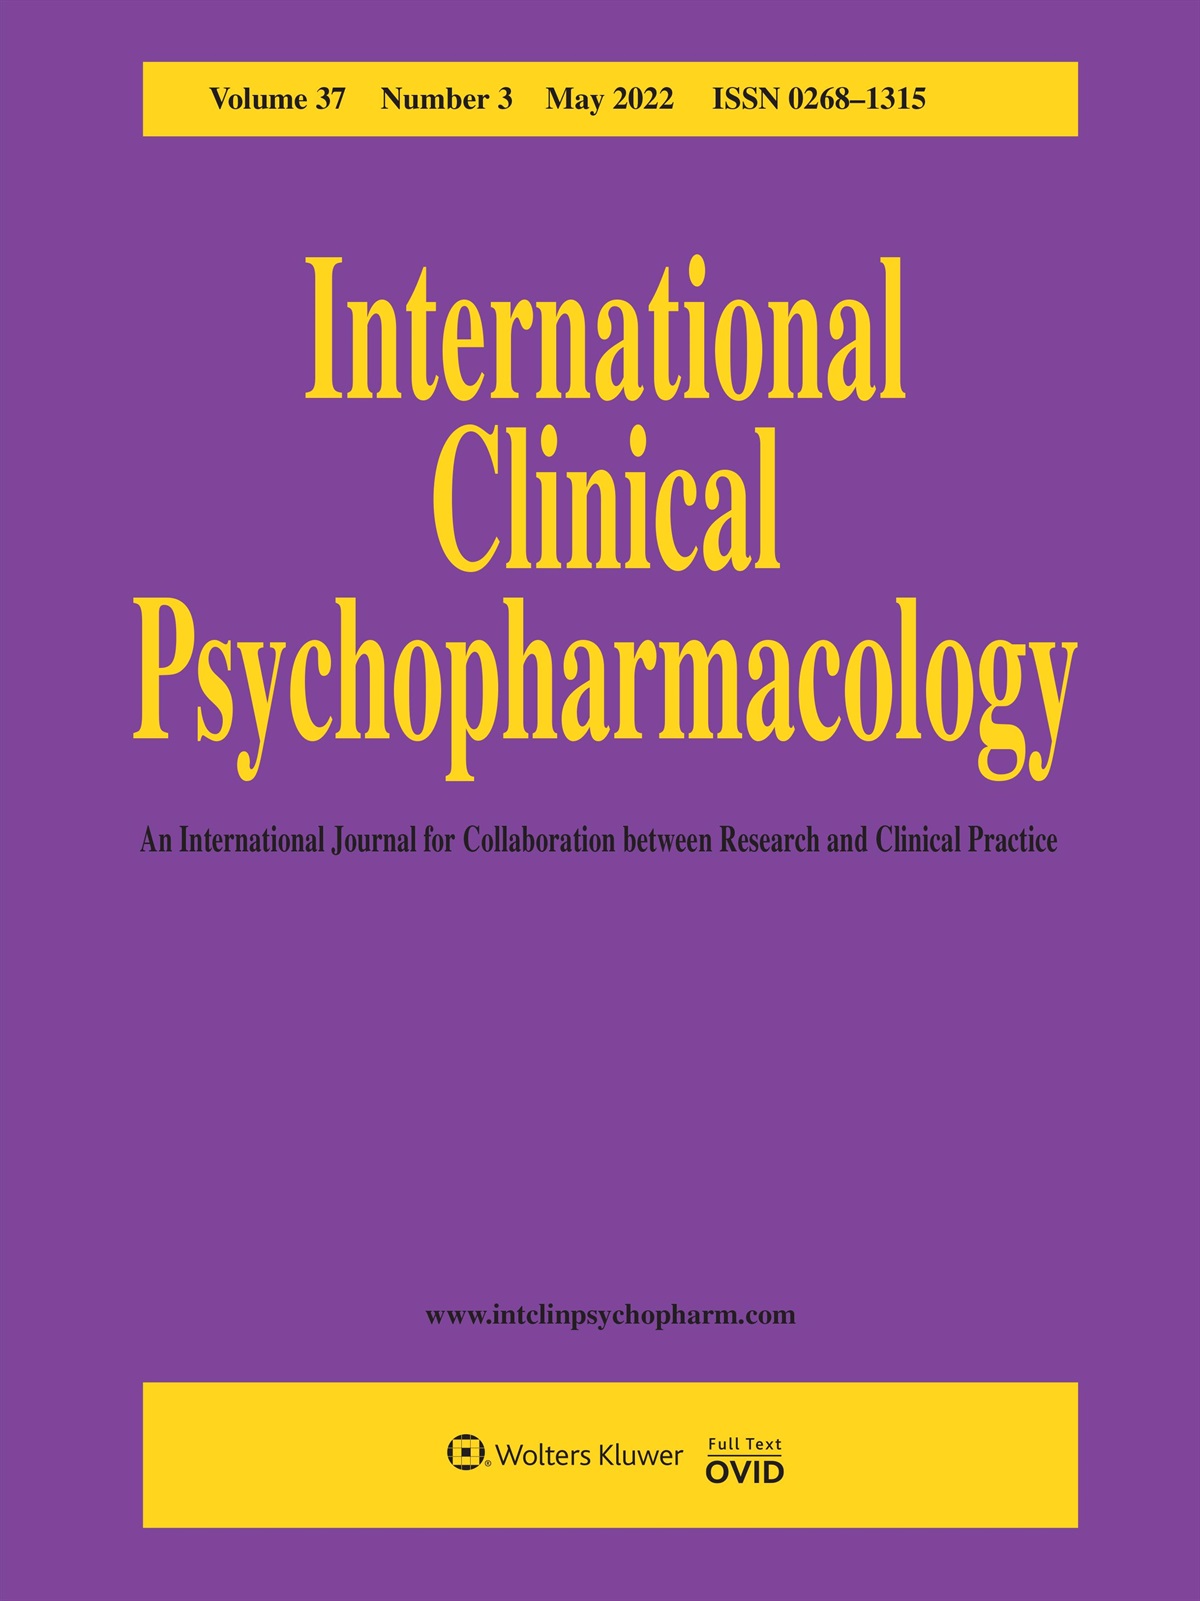 Antidepressant psychopharmacology: is inflammation a future target?